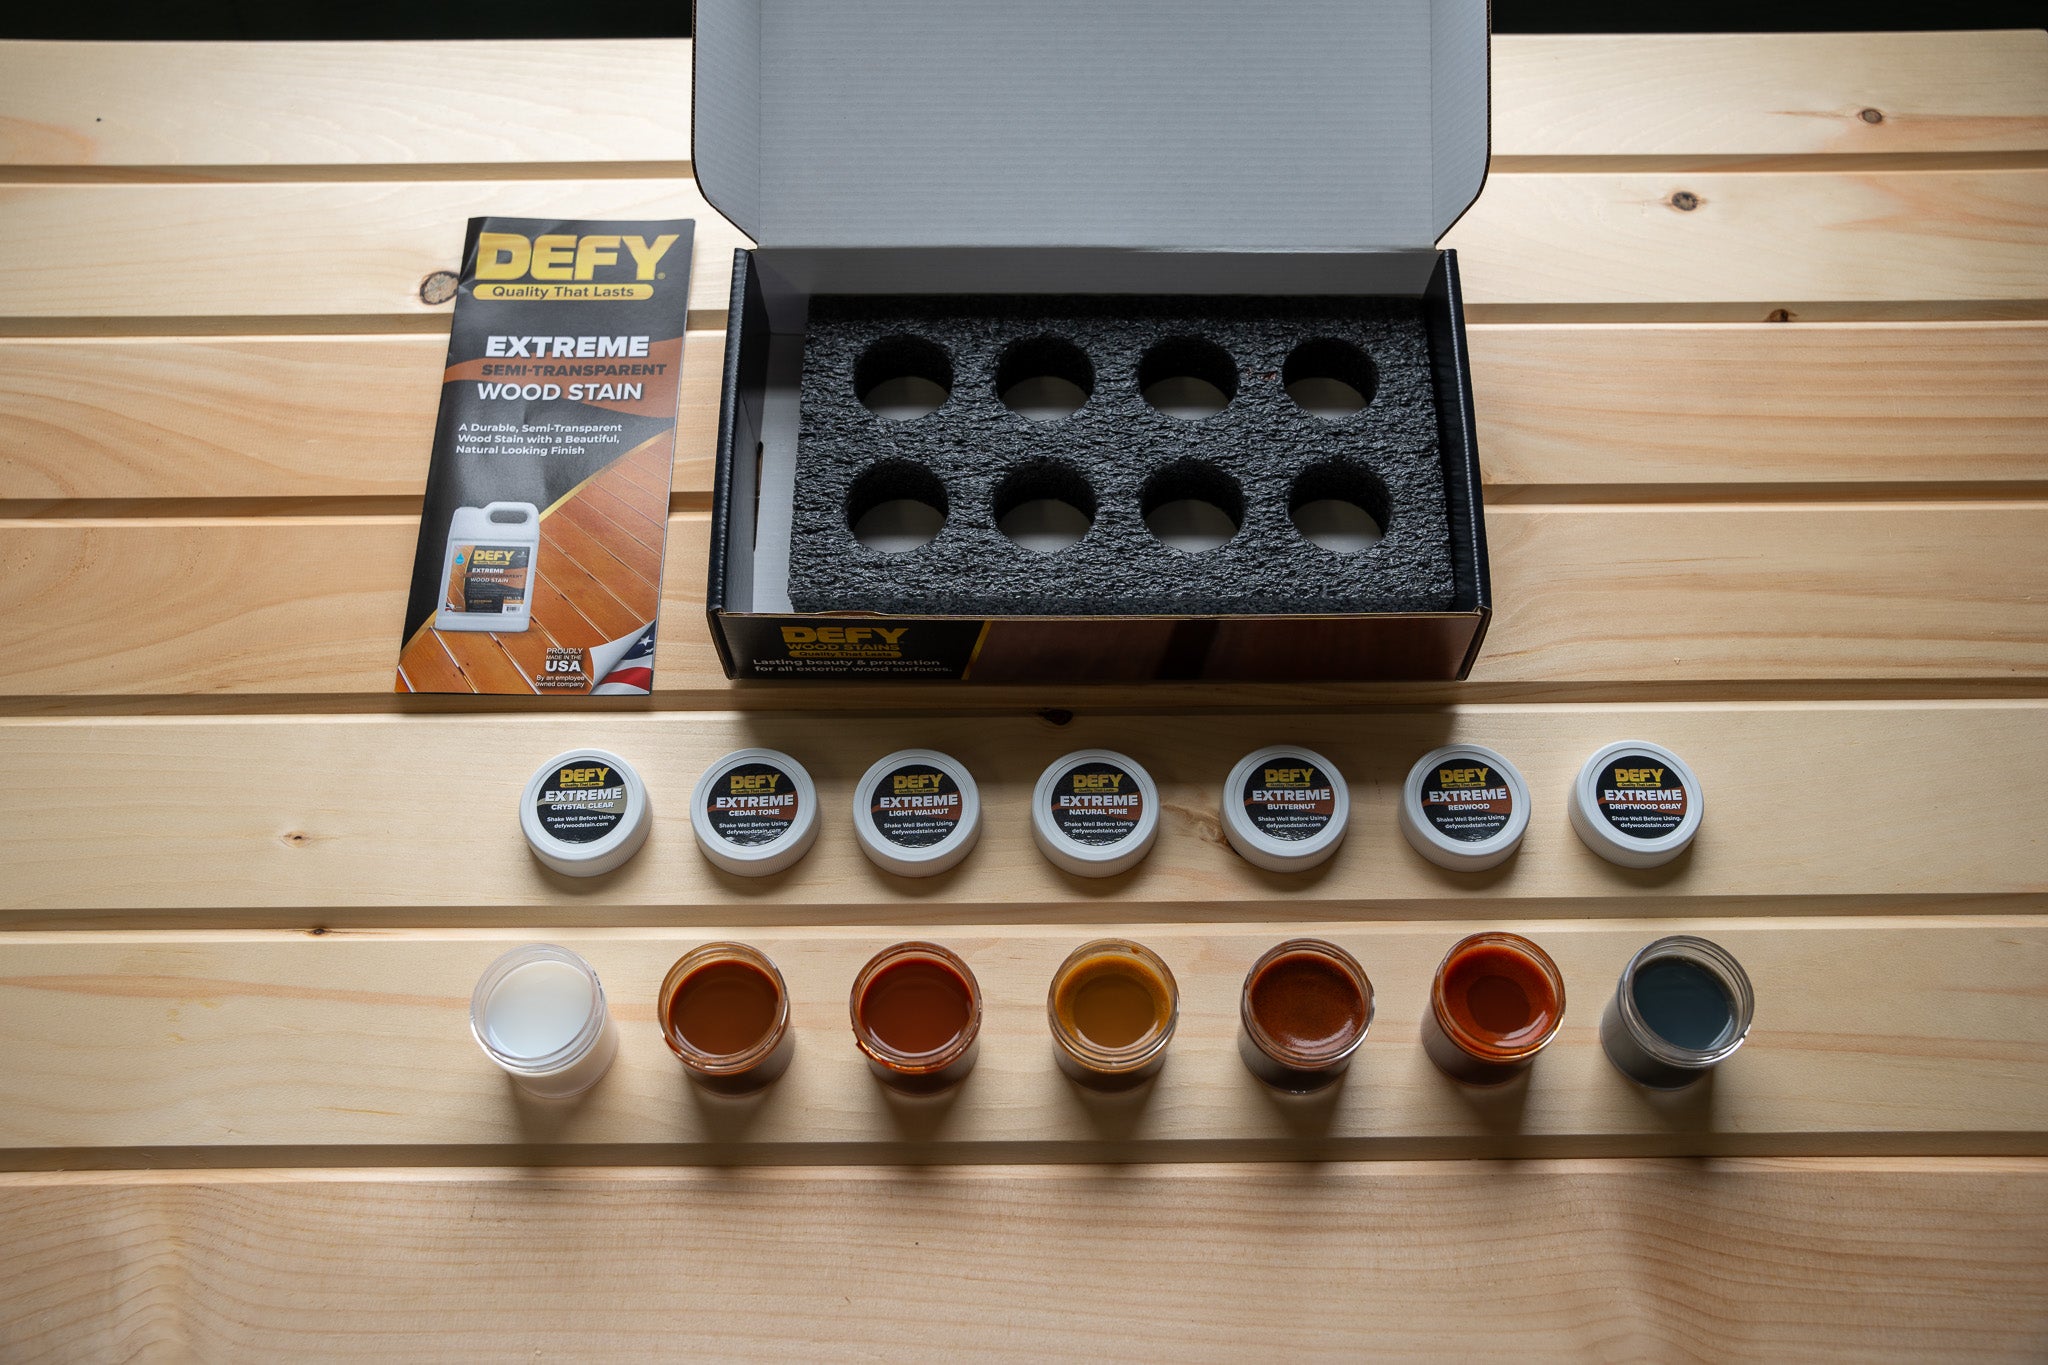 DEFY Extreme Semi-Transparent Stain Samples